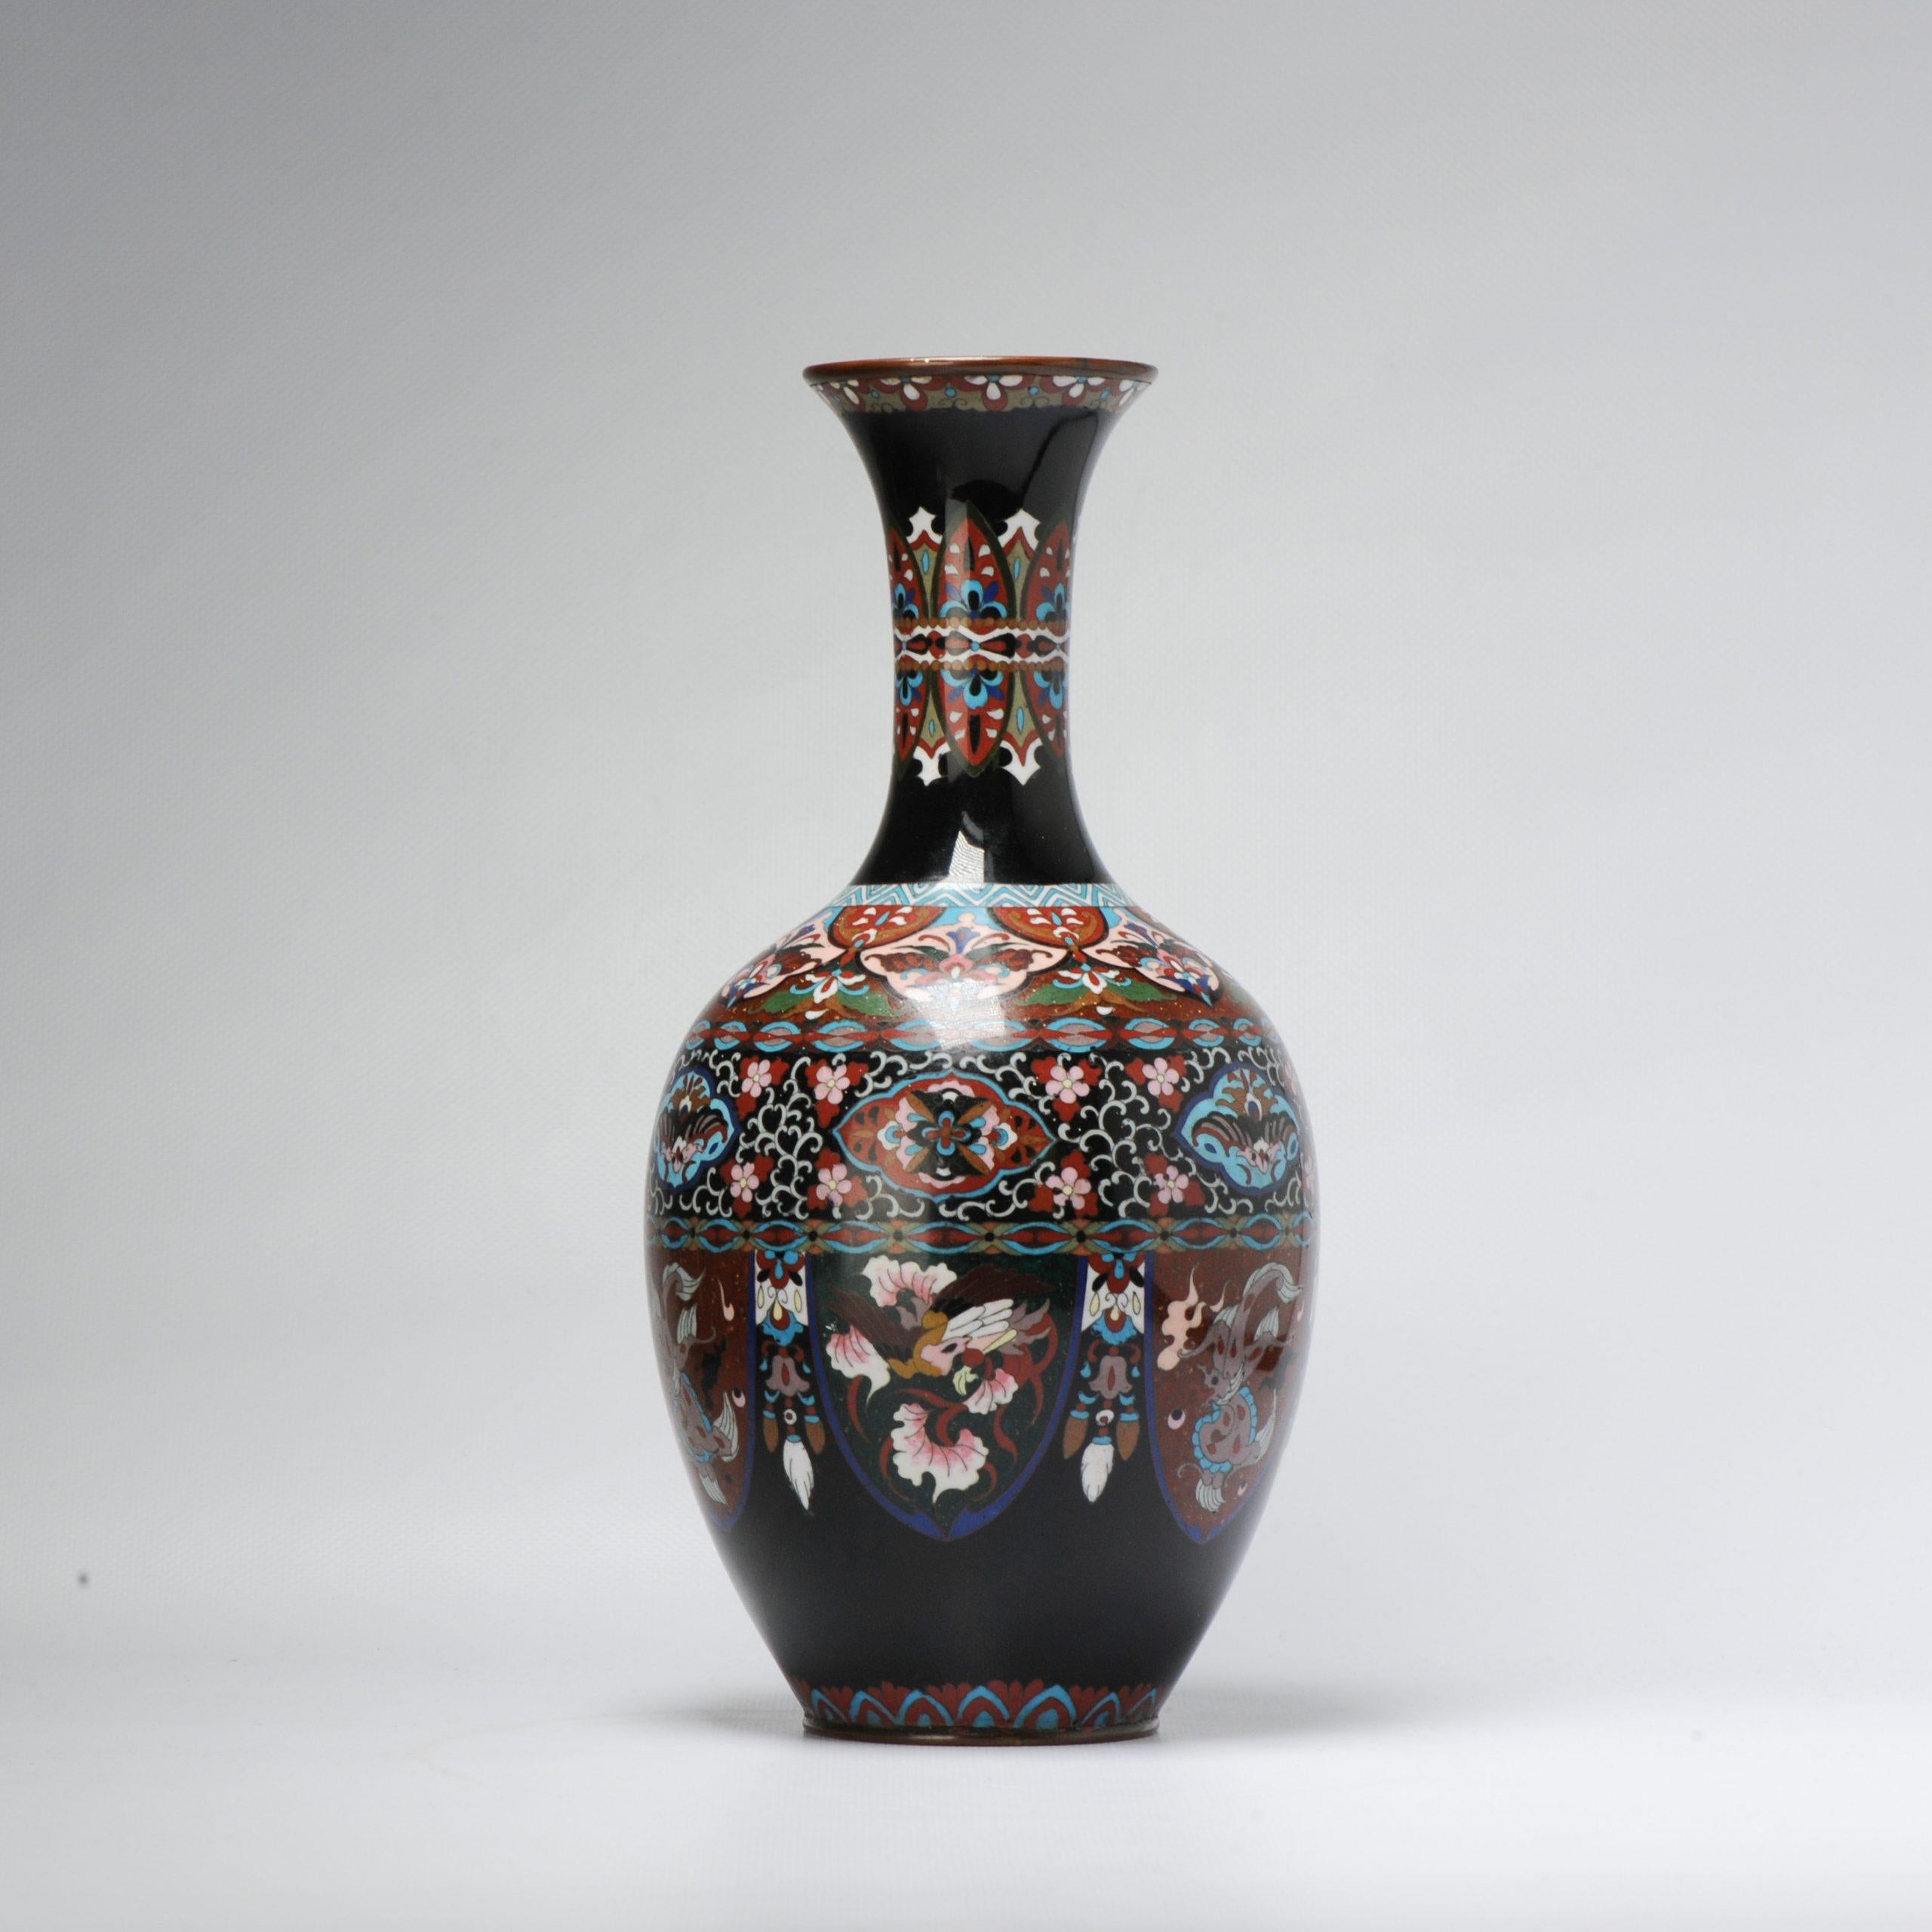 Lovely 19c Antique Meiji Period Japanese Vase Flower Bronze Cloisonne In Good Condition For Sale In Amsterdam, Noord Holland